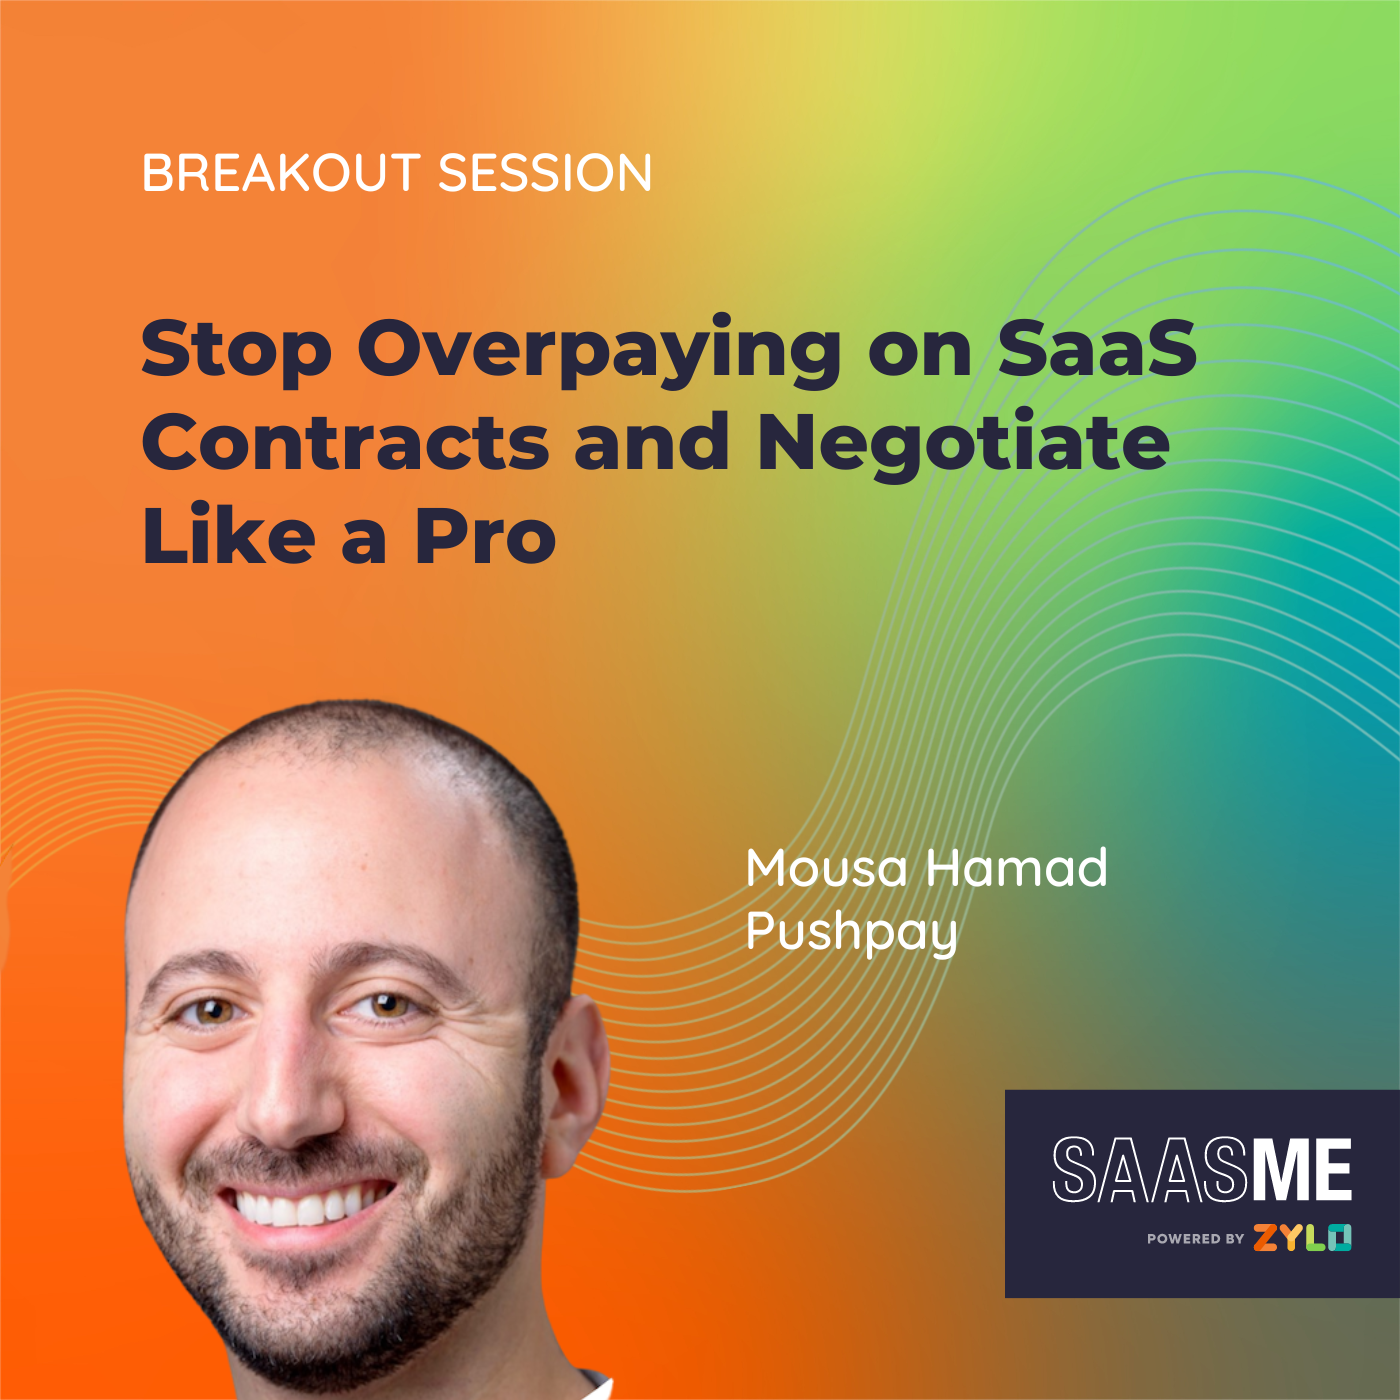 Stop Overpaying on SaaS Contracts and Negotiate Like a Pro